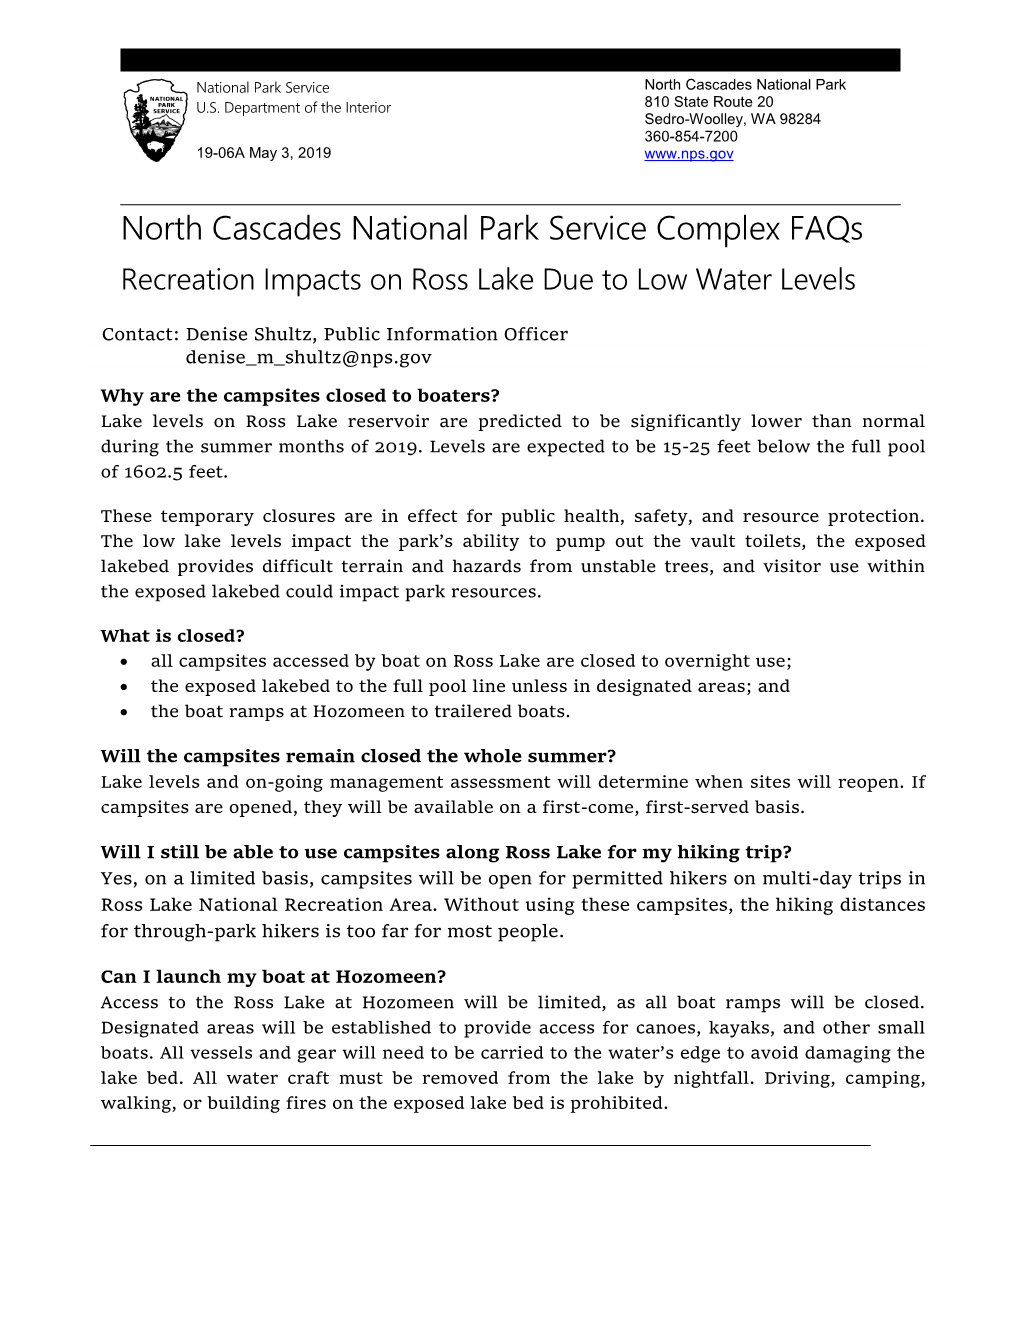 North Cascades National Park Service Complex Faqs Recreation Impacts on Ross Lake Due to Low Water Levels